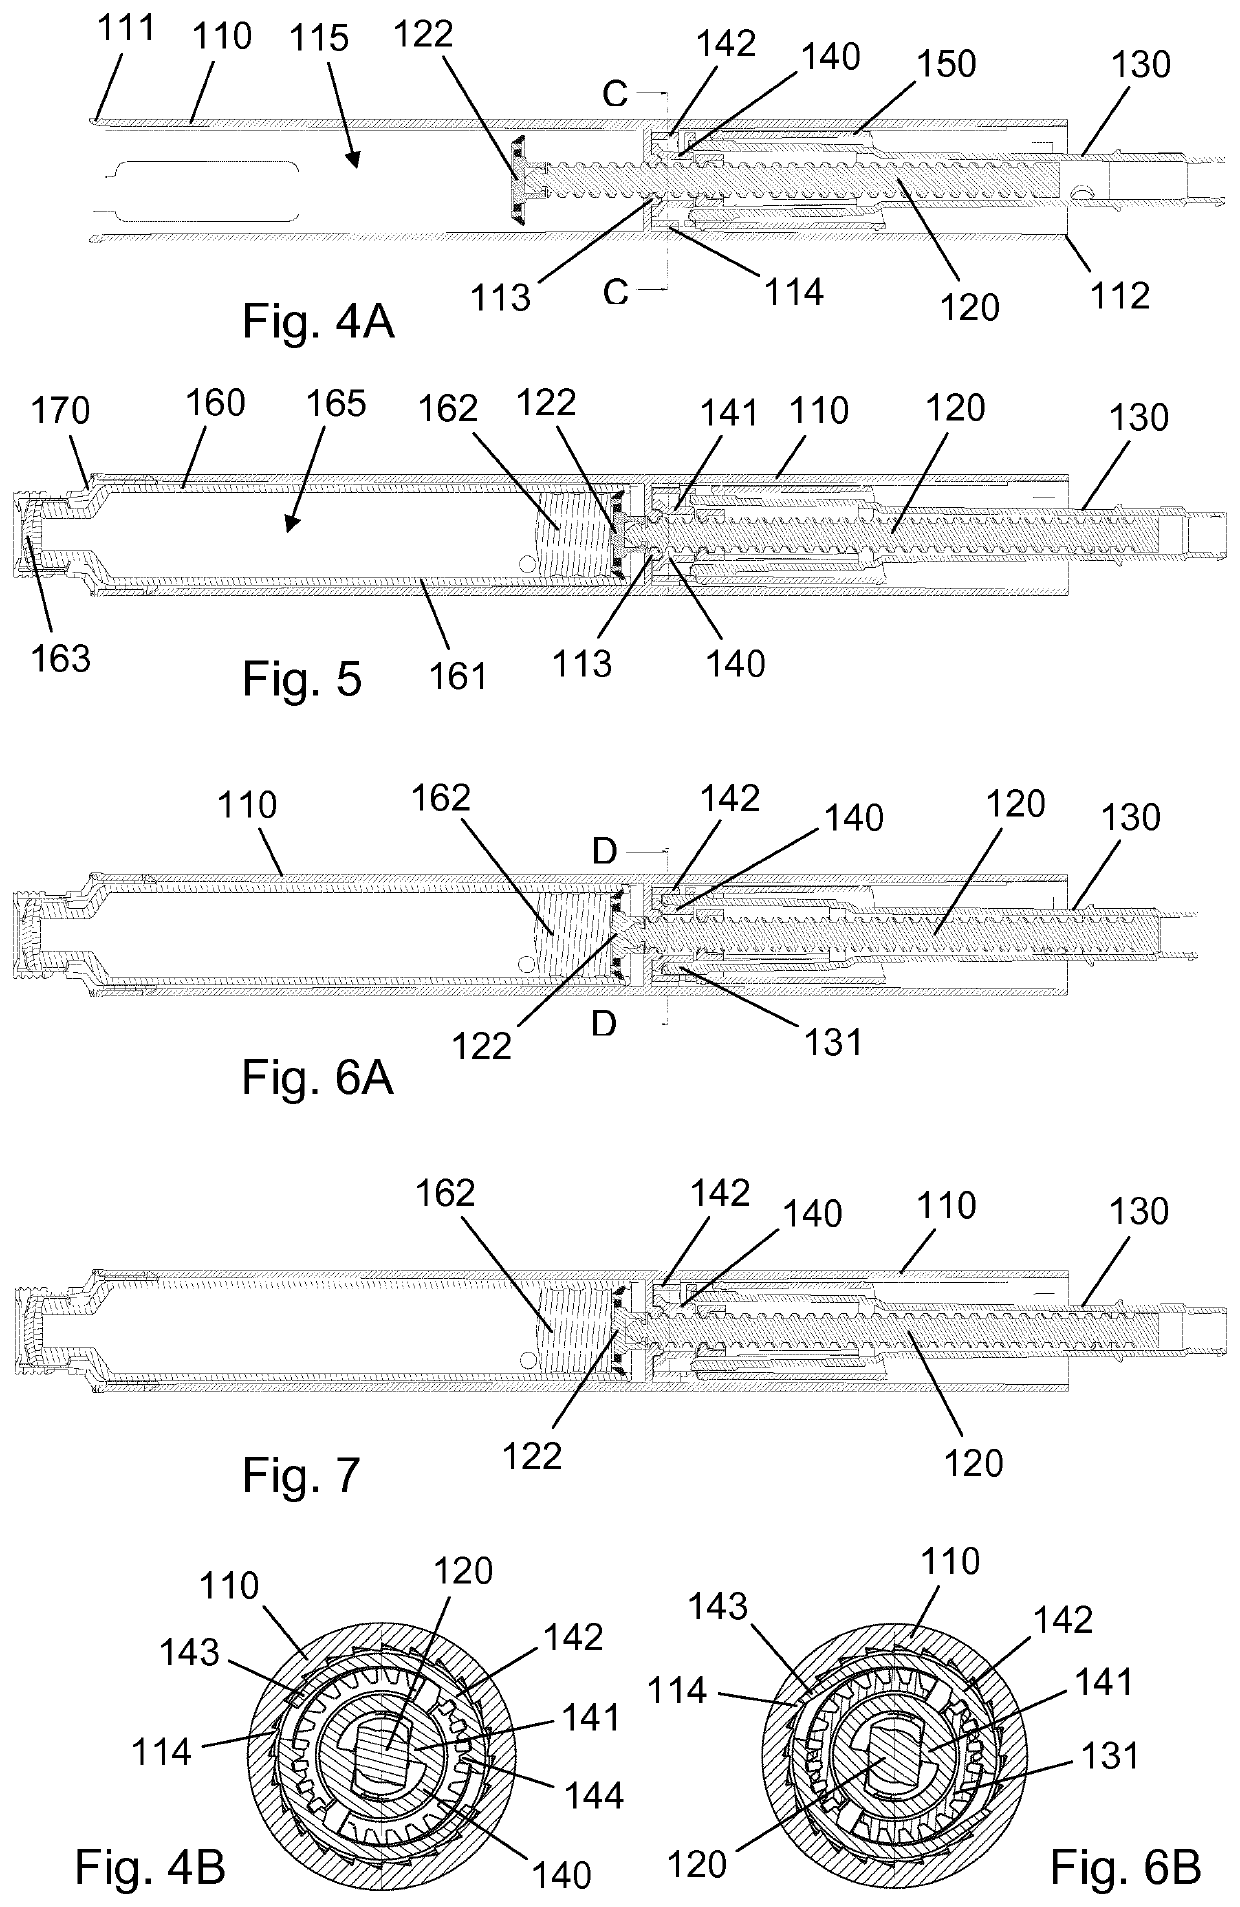 Method of manufacturing prefilled drug delivery devices